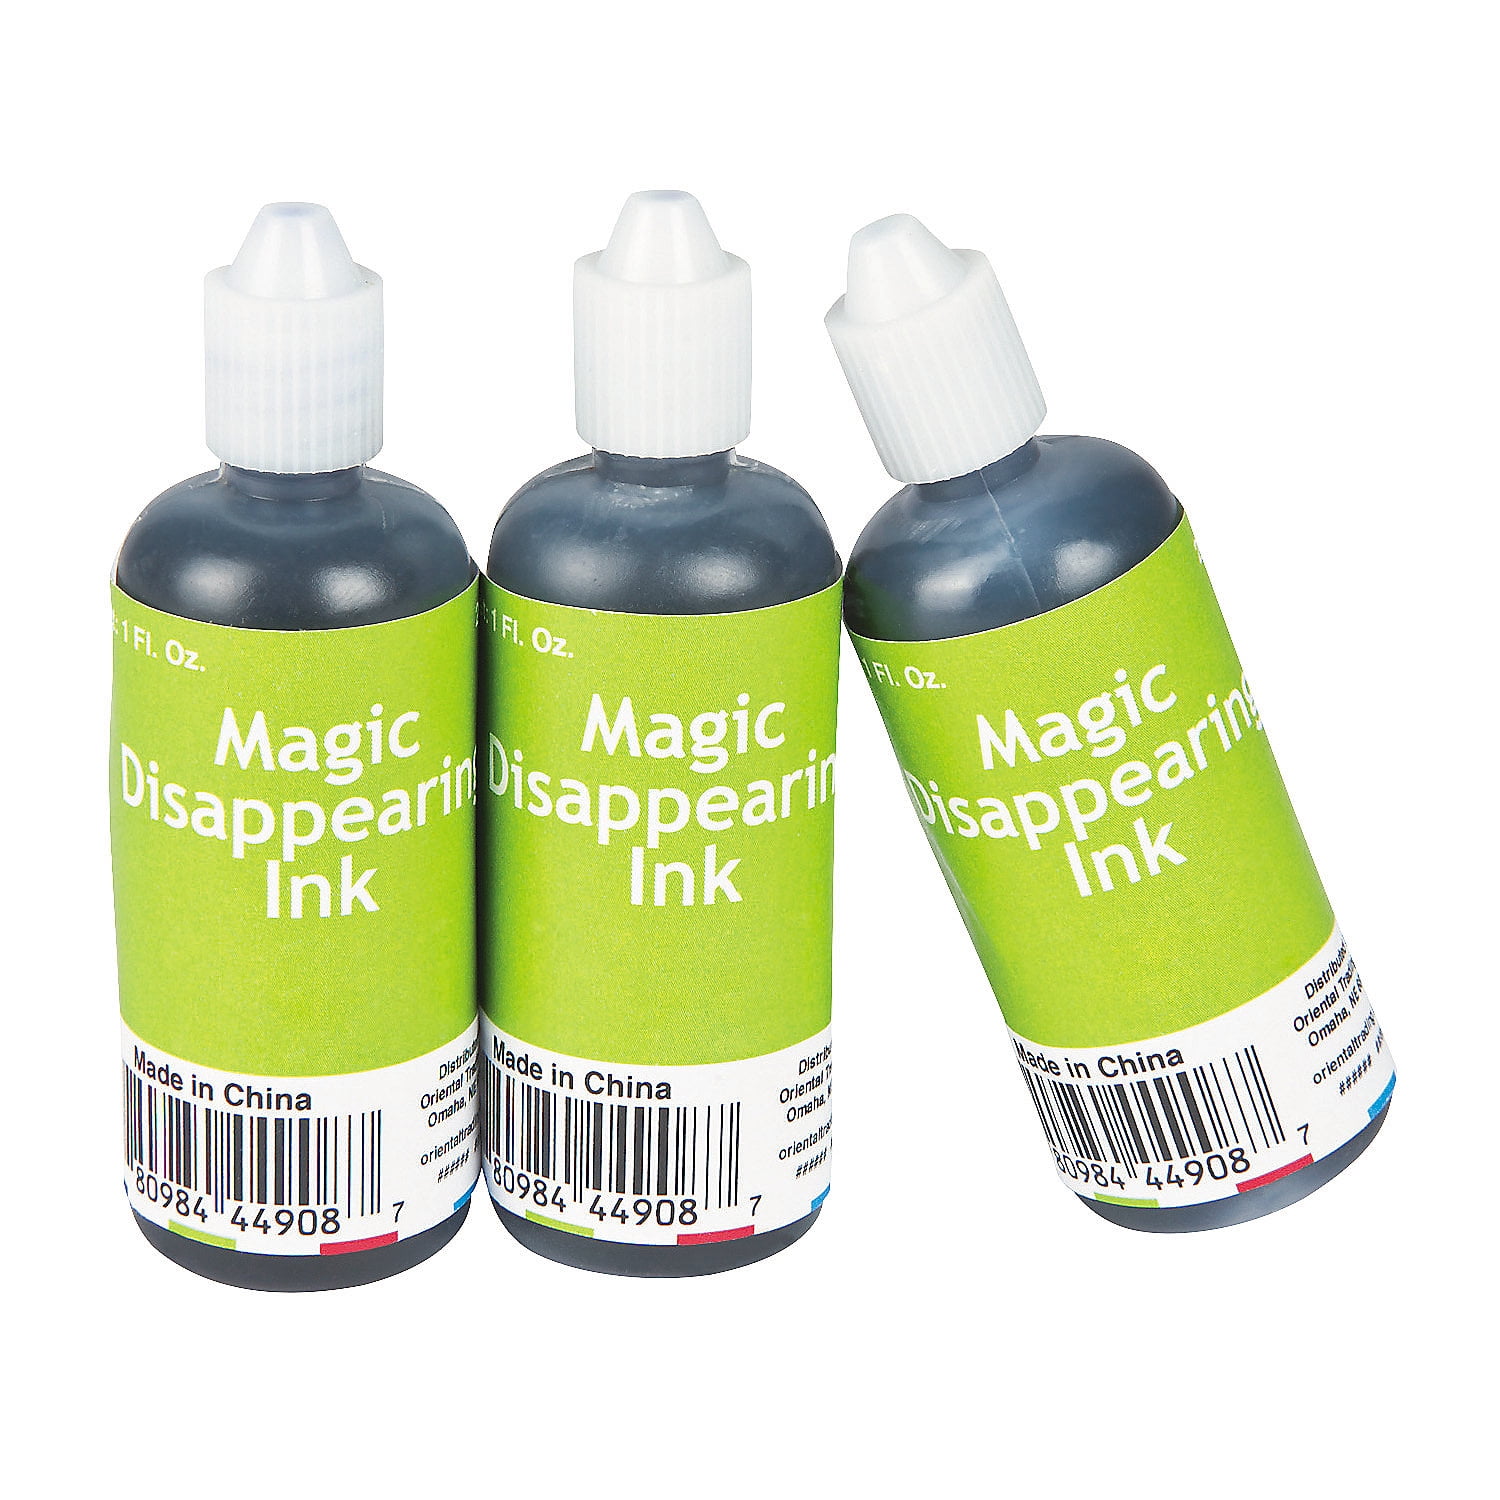 Magic Disappearing Ink (2Dz) - Toys - 24 Pieces 